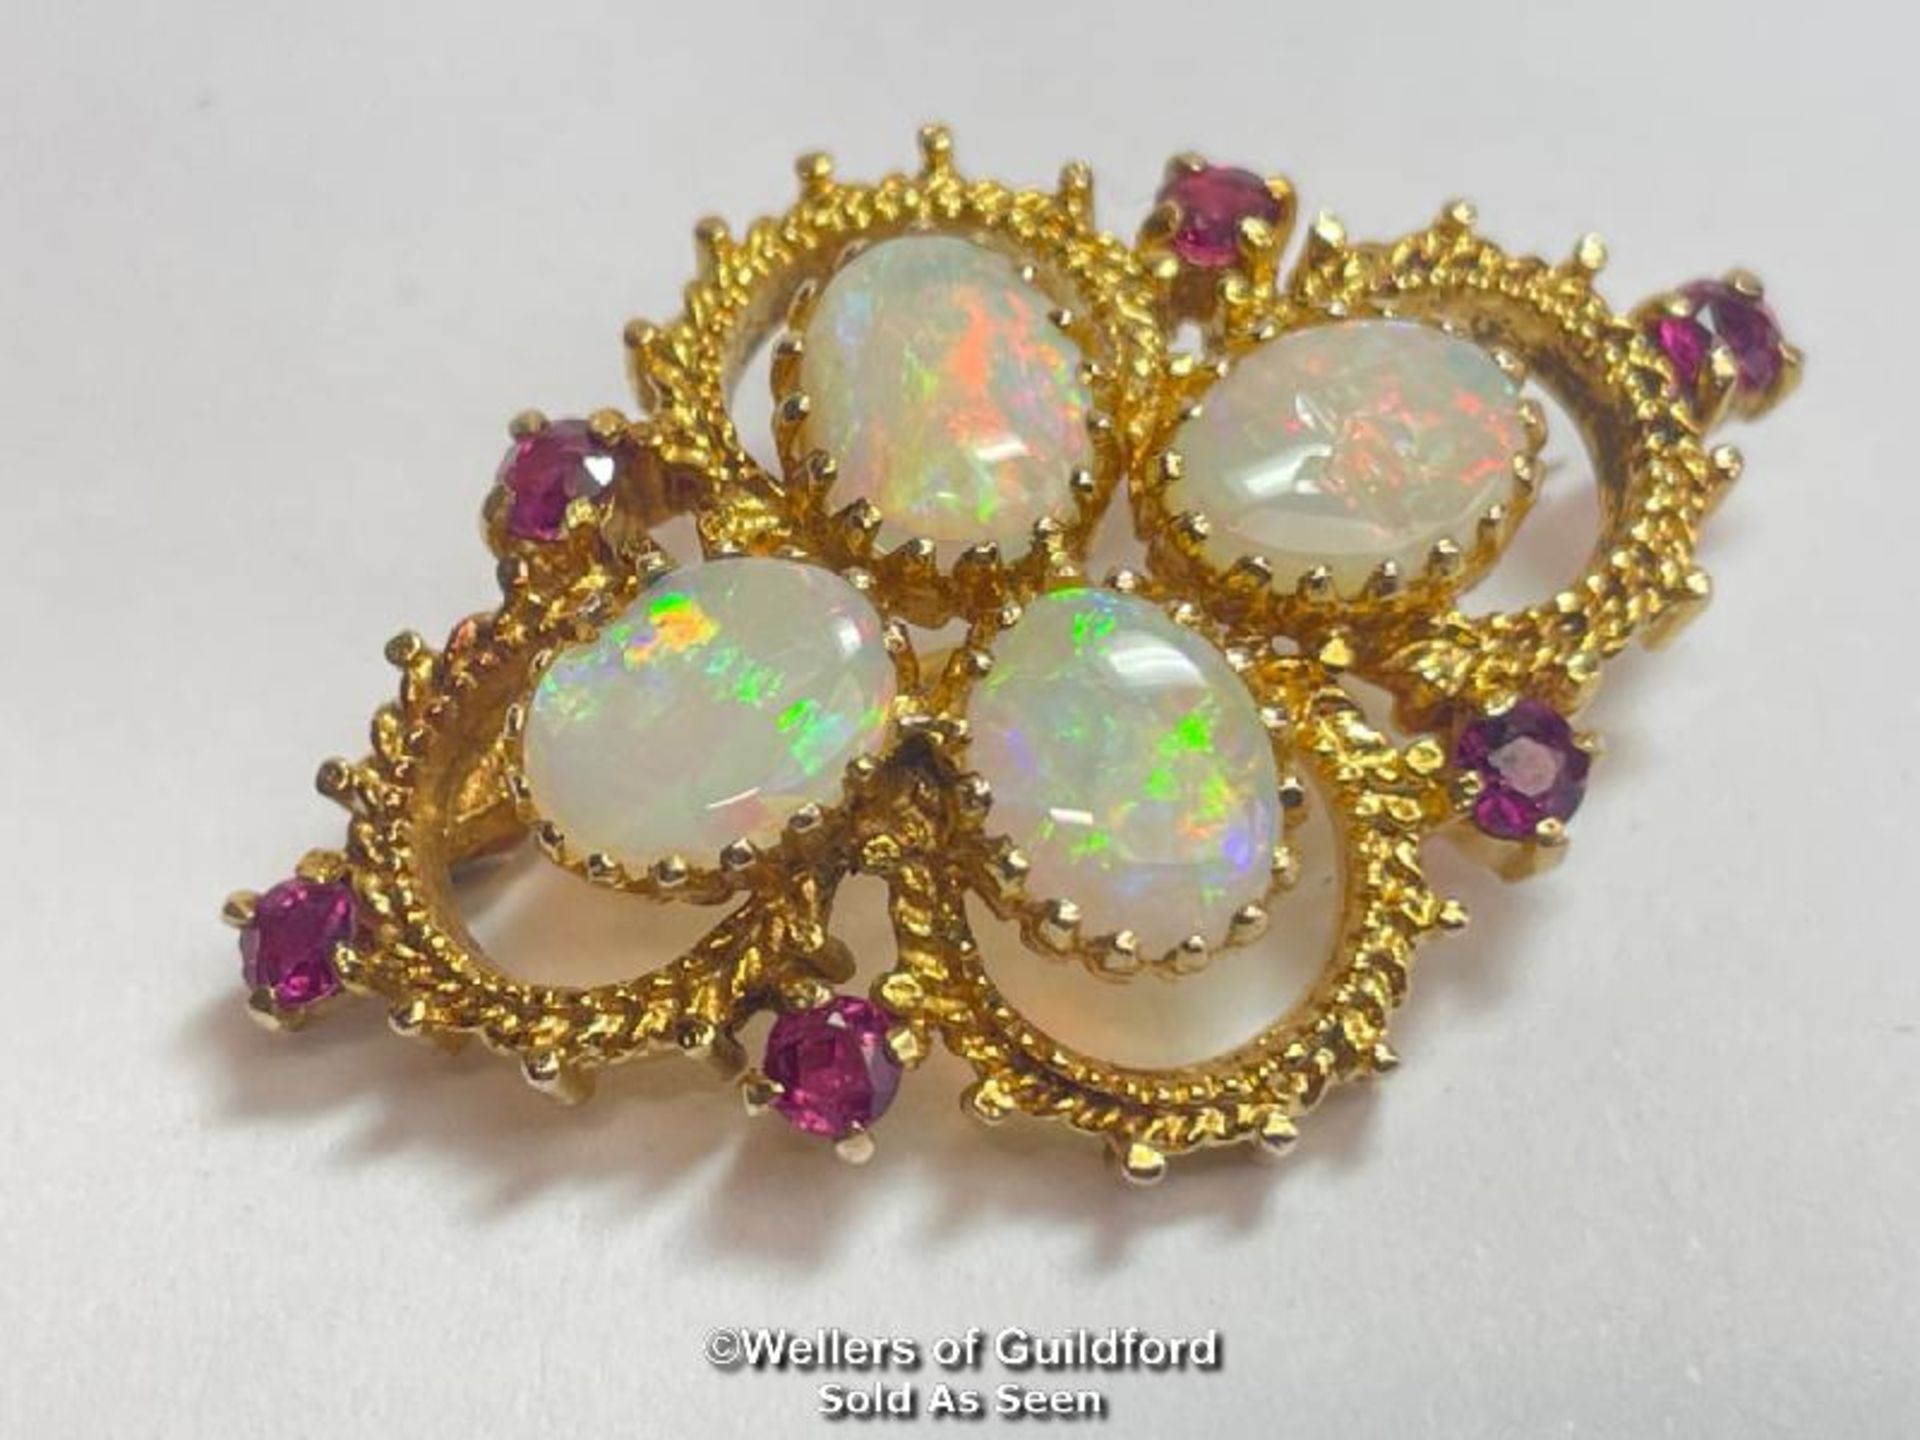 Opal and ruby quatrefoil brooch in 9ct gold. Opals measure approx 9mm x 7mm. Hallmarks for Sheffield